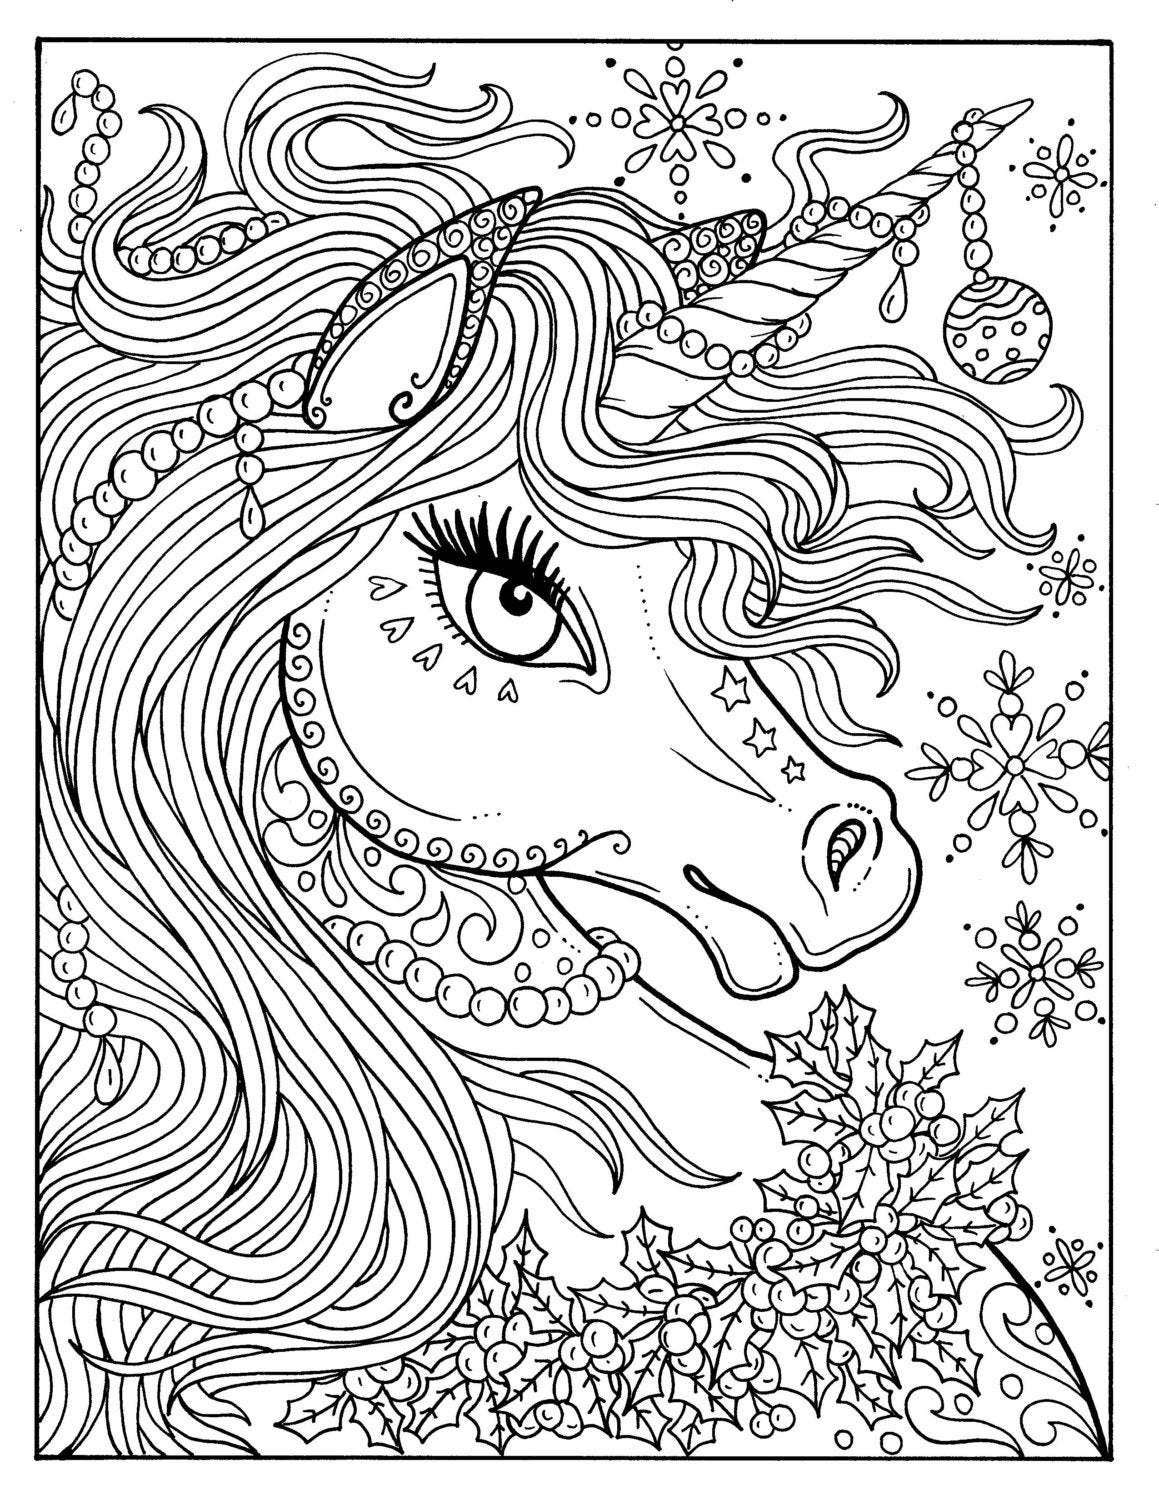 get drawing among us coloring pages unicorn png coloring pages